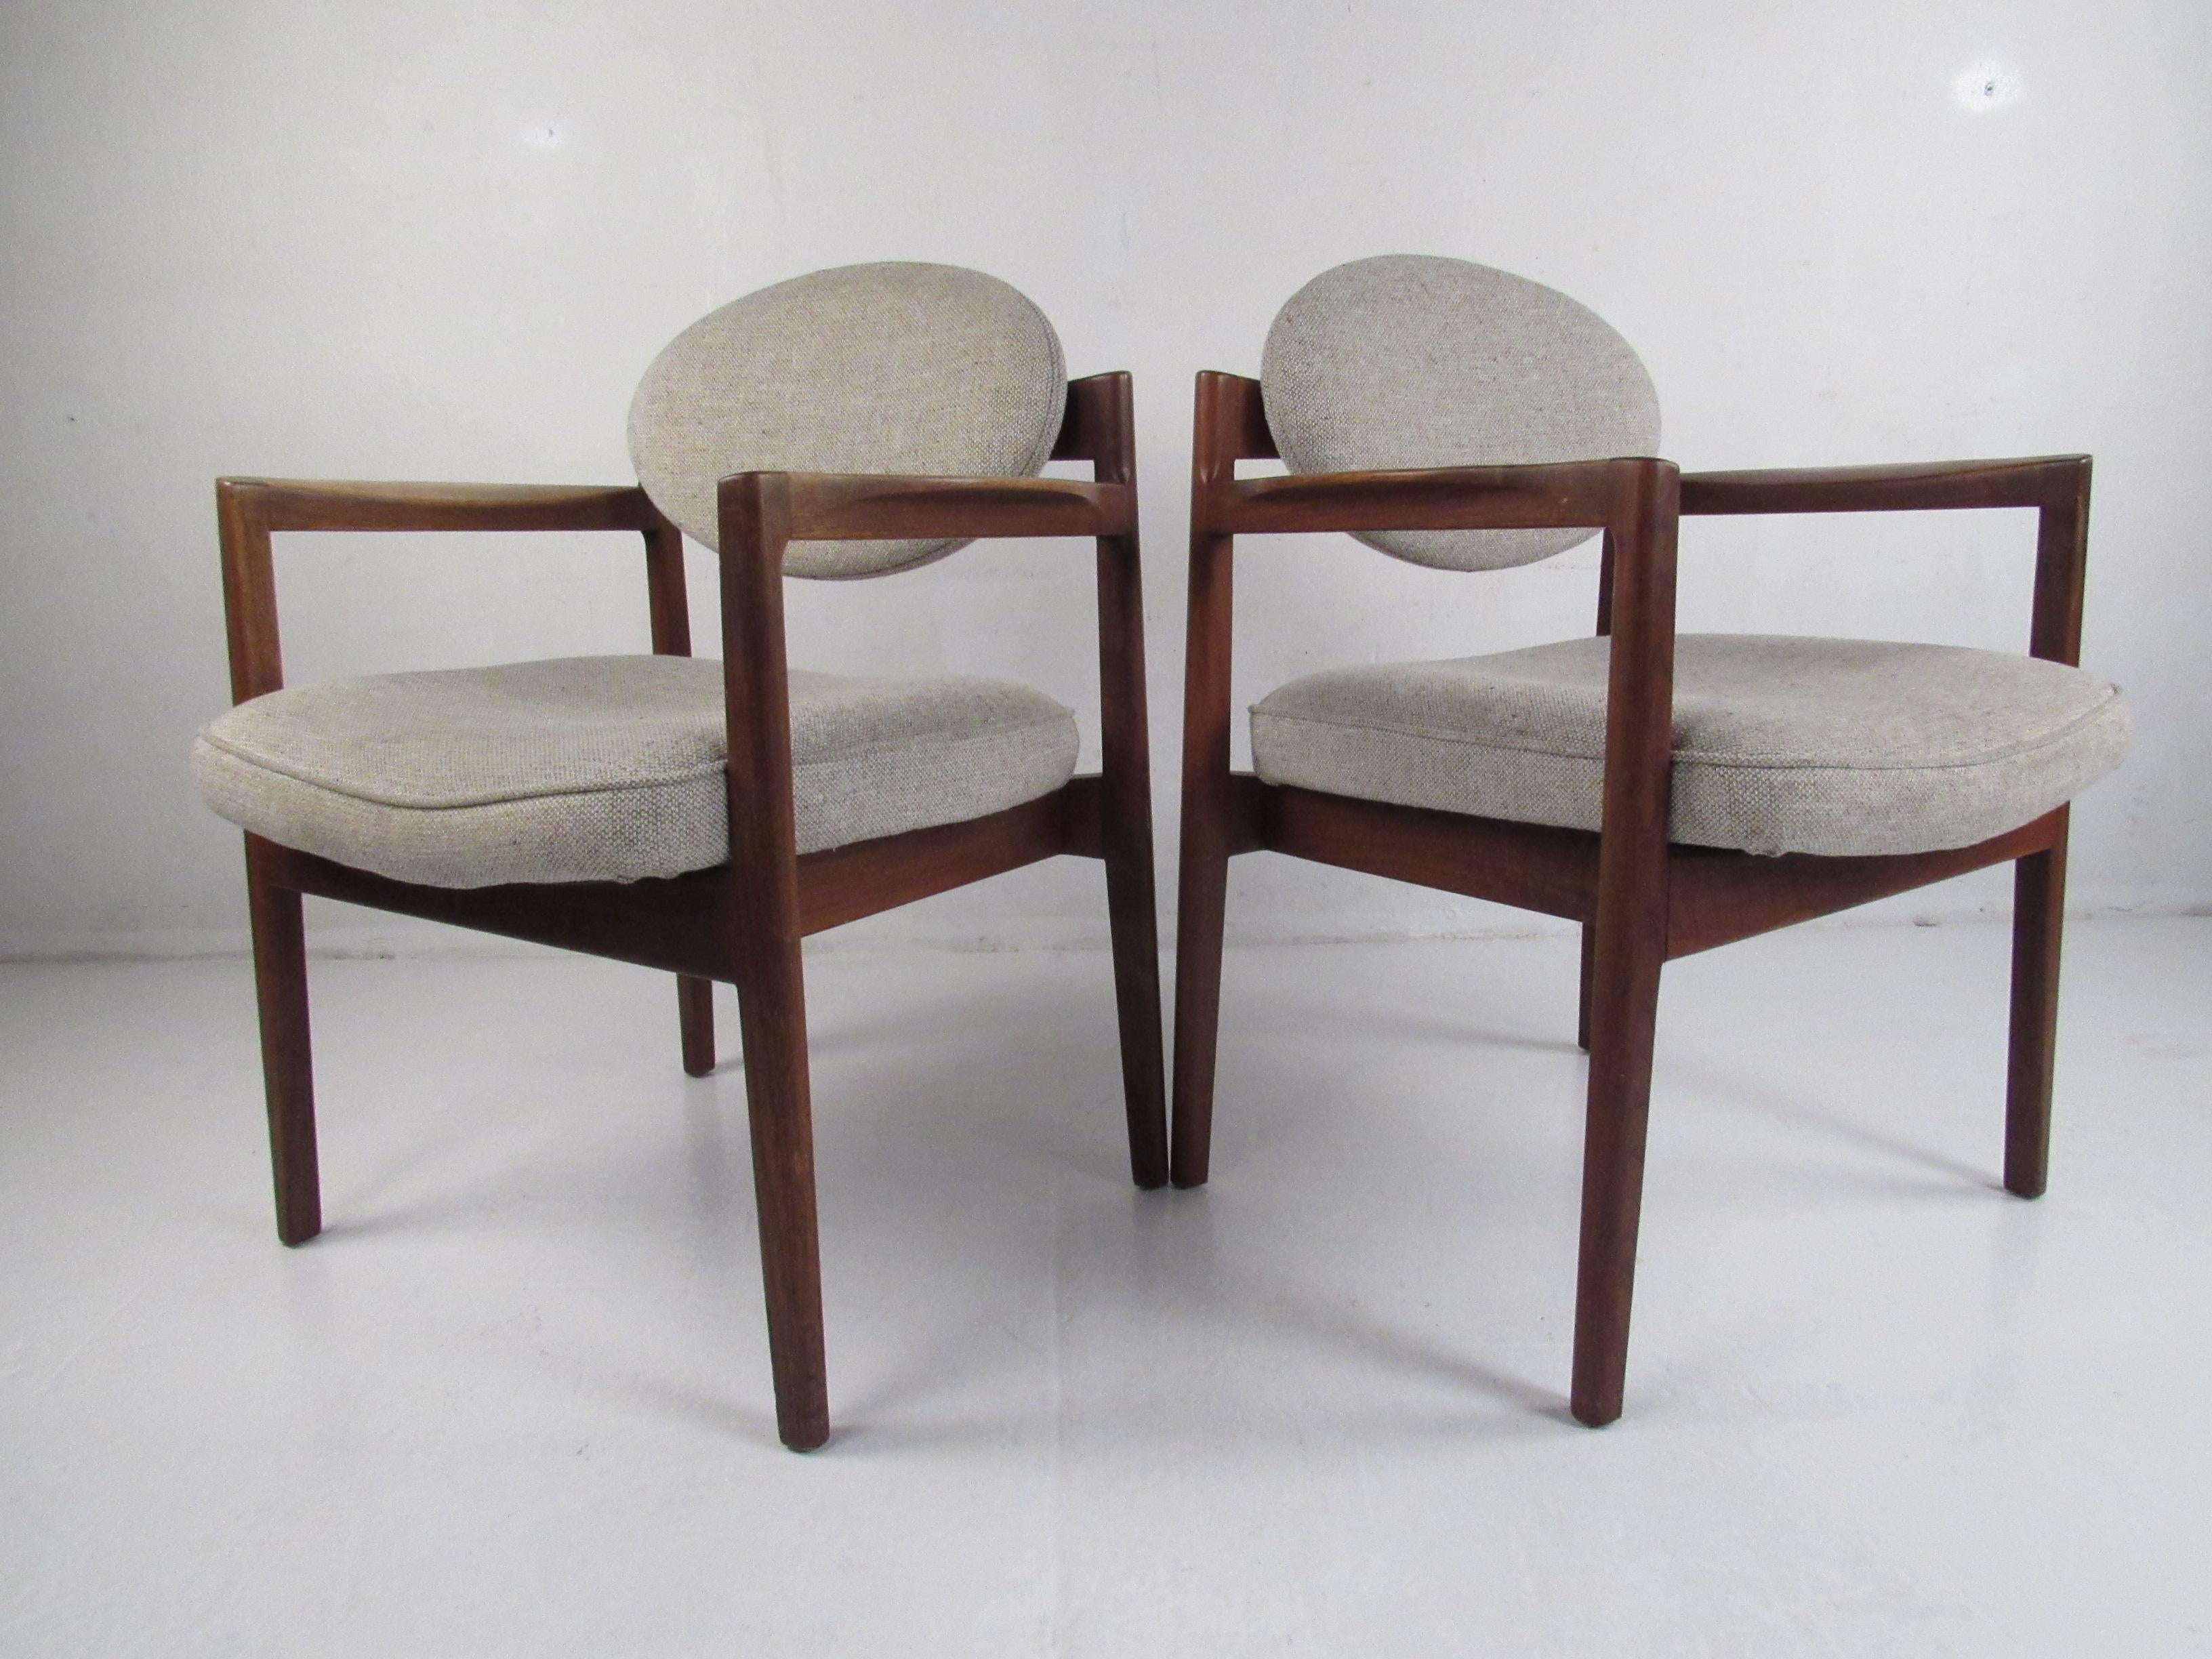 This beautiful pair of vintage Jens Risom chairs boast sculpted arm rests, tapered legs, and soft light gray upholstery. An extremely unique design with floating circular back rests and thick padded seating. Quality craftsmanship with straight lines